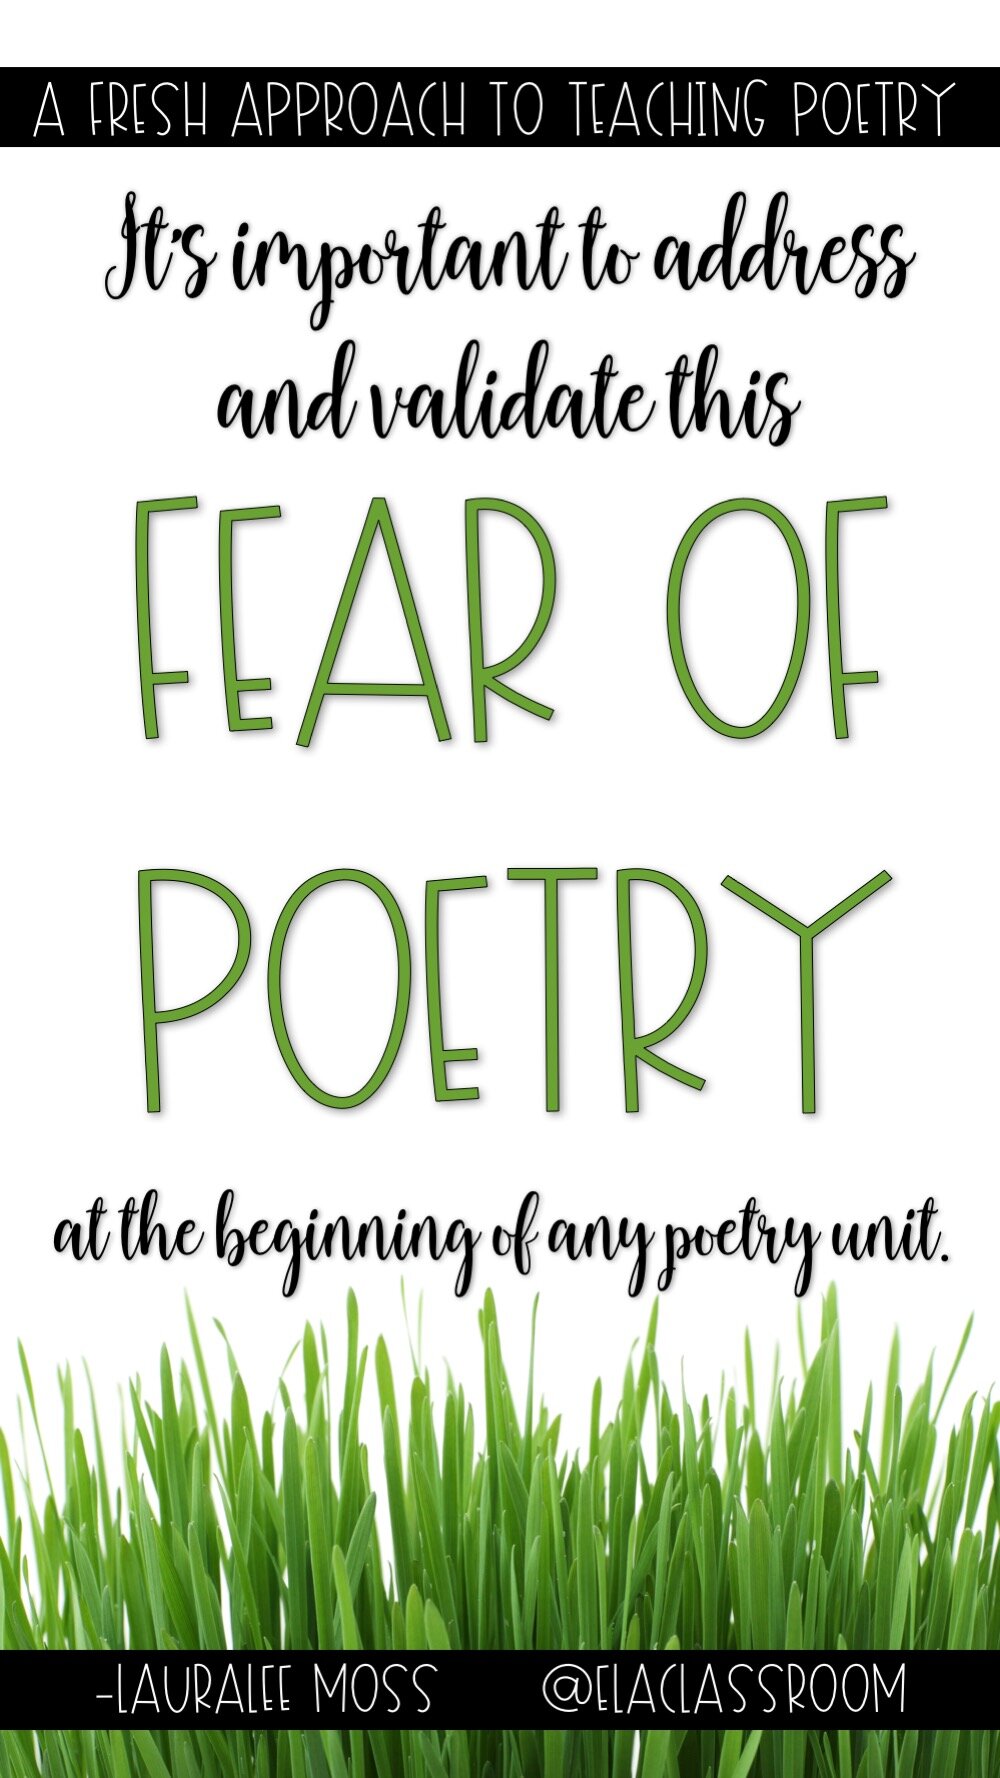 Pull Quotes Pin Images 12 Poetry Ideas.jpg